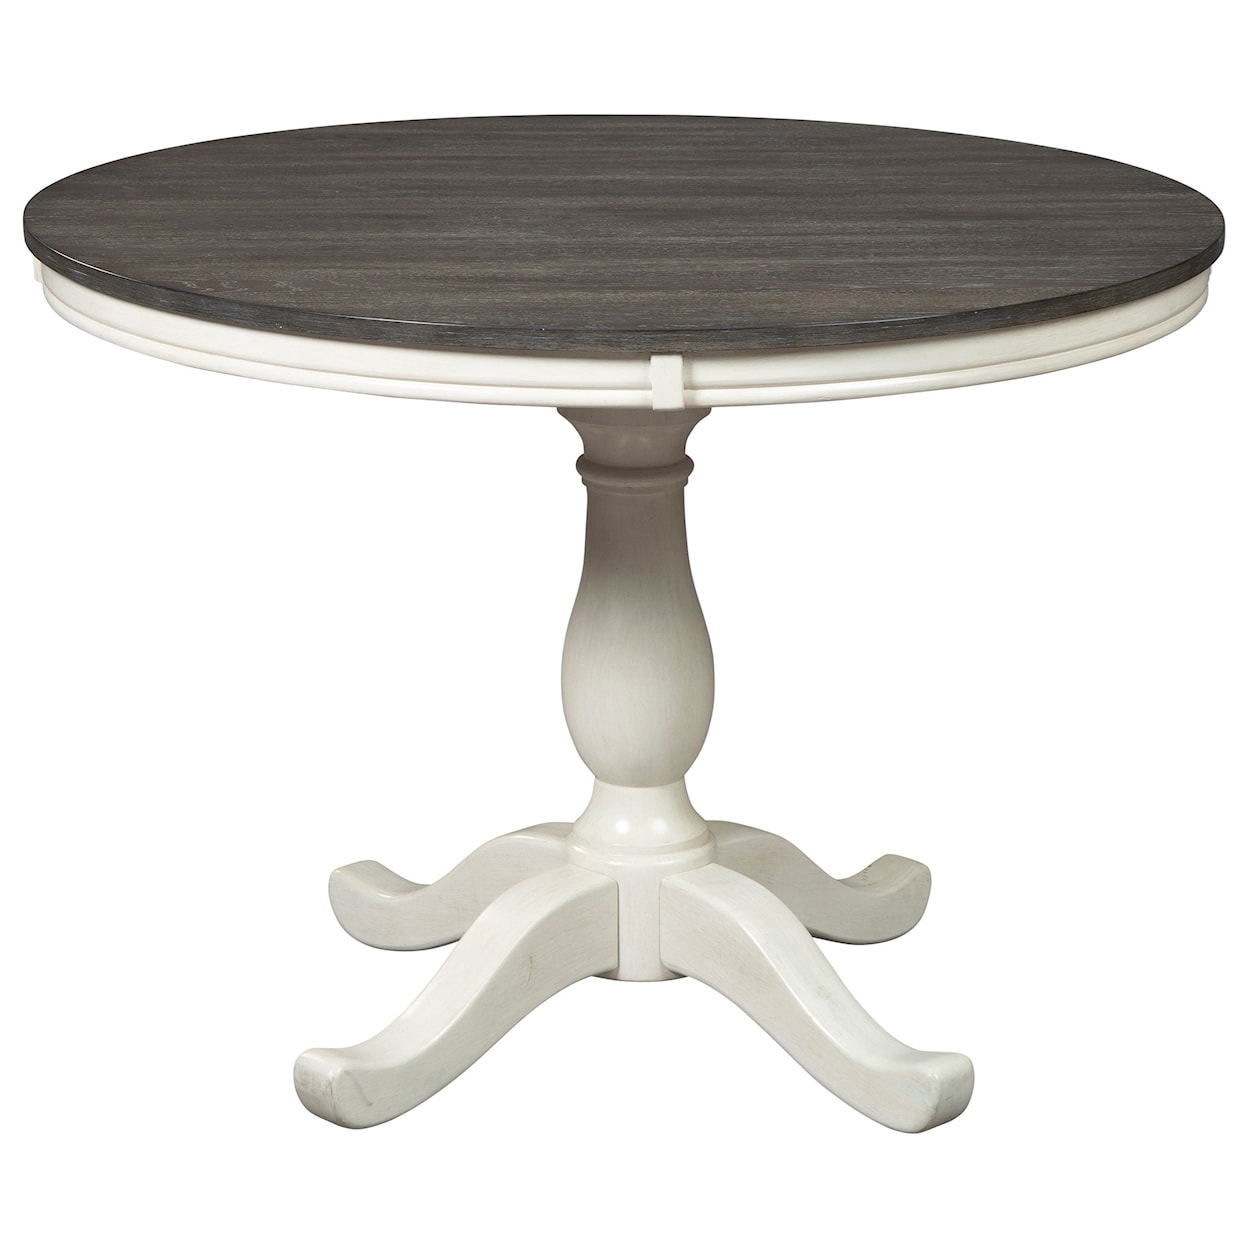 Michael Alan Select Nelling 3-Piece Round Dining Table Set